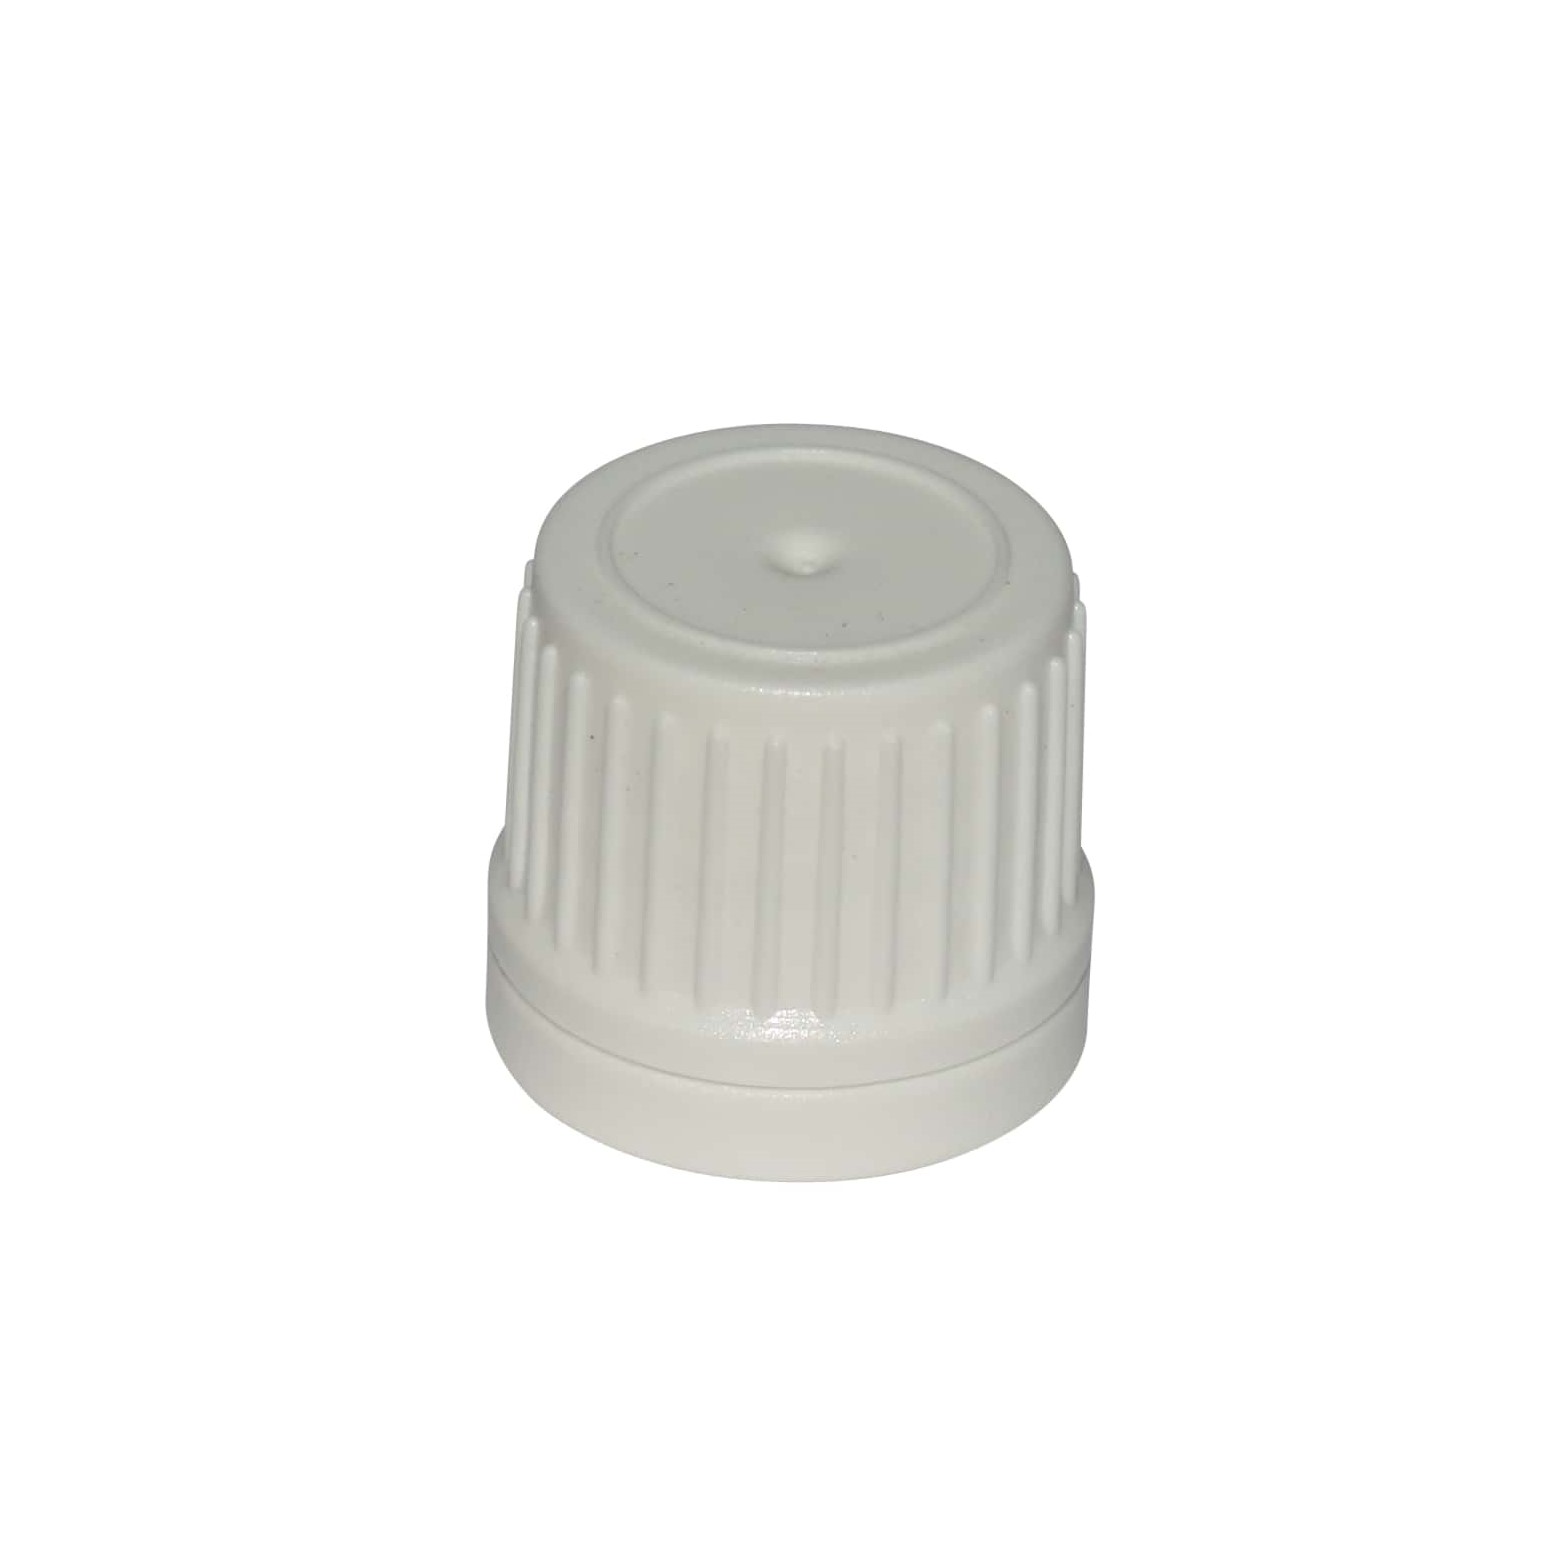 Screw cap with disc top, PP plastic, white, for opening: GPI 24/410